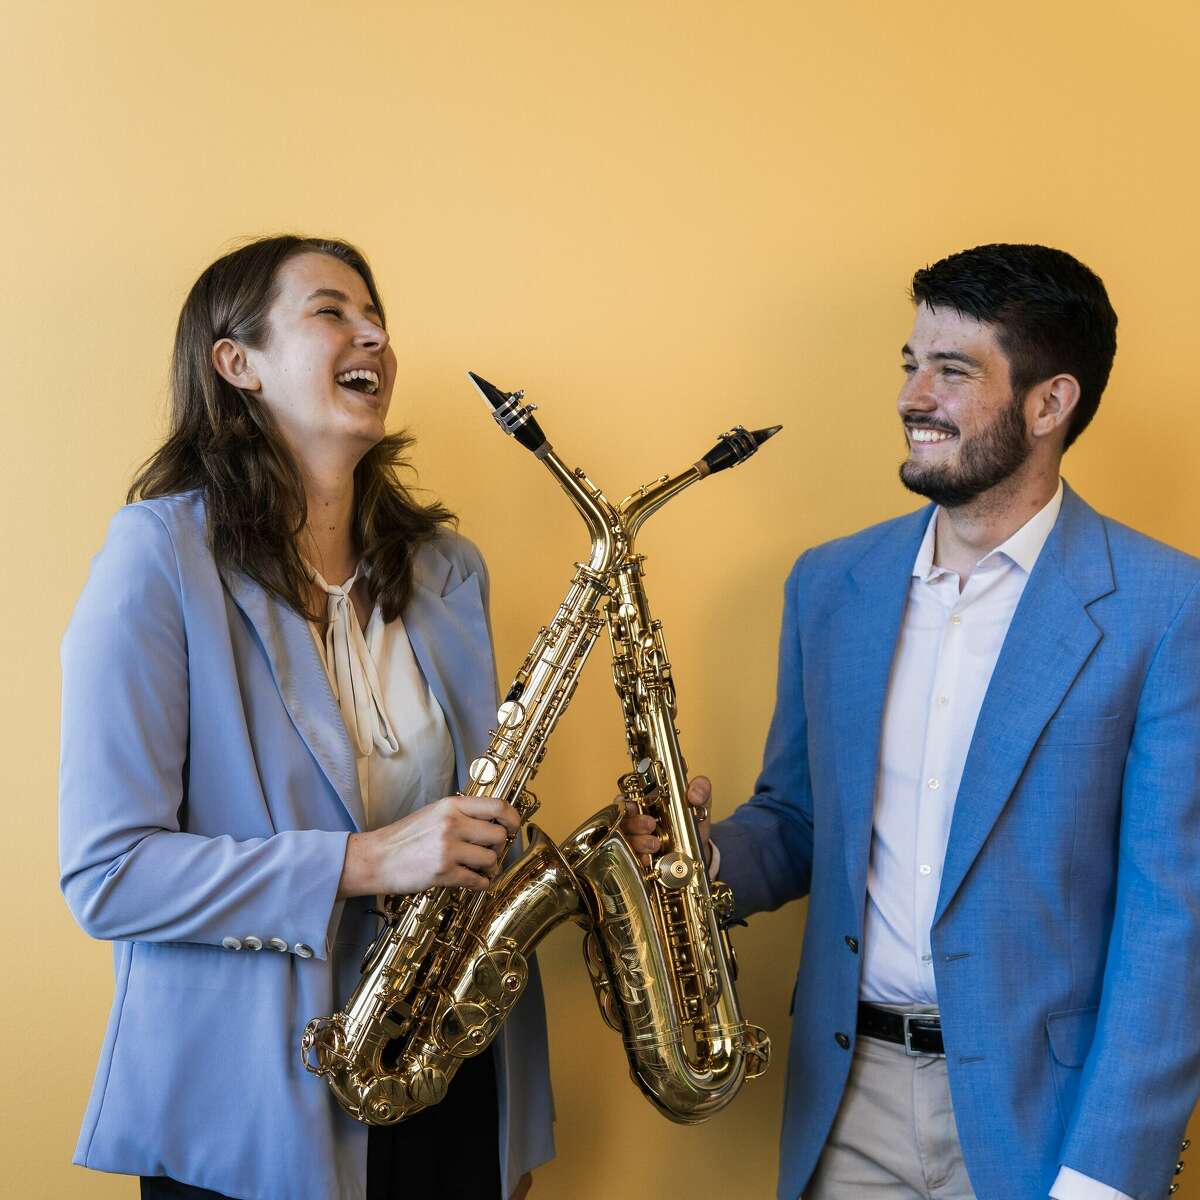 SiP Duo (Saxophone in Progress) features Jacob Nance and Natalia Warthen, MSU musicians playing a concert in Big Rapids this Sunday.